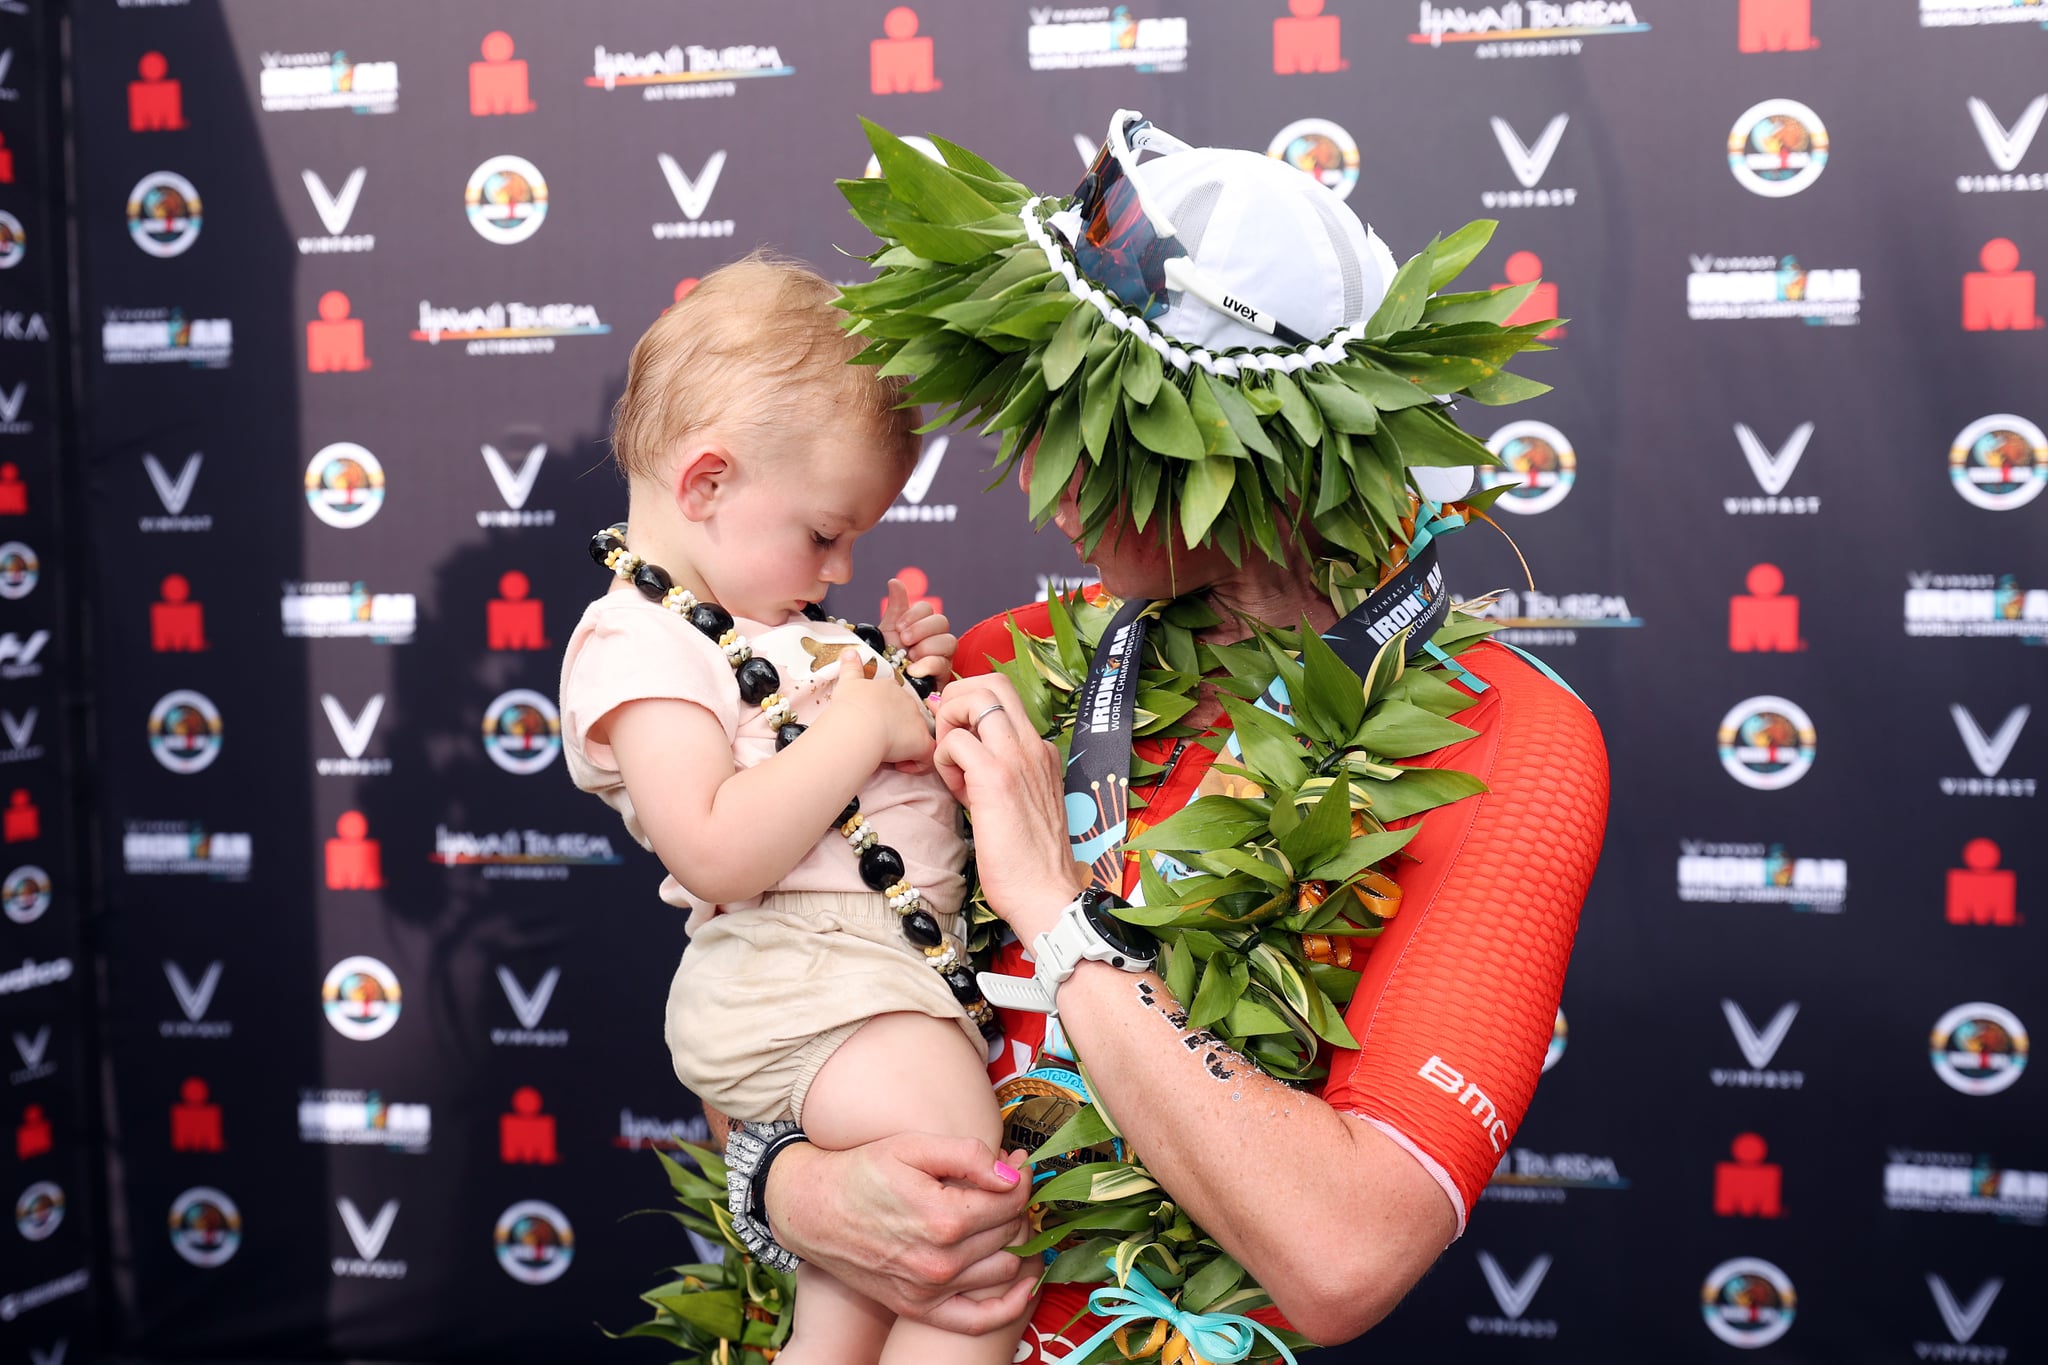 KAILUA KONA, HAWAII - OCTOBER 06: Chelsea Sodaro celebrates with her daughter Skylar after winning the Ironman World Championships on October 06, 2022 in Kailua Kona, Hawaii. (Photo by Ezra Shaw/Getty Images for IRONMAN)